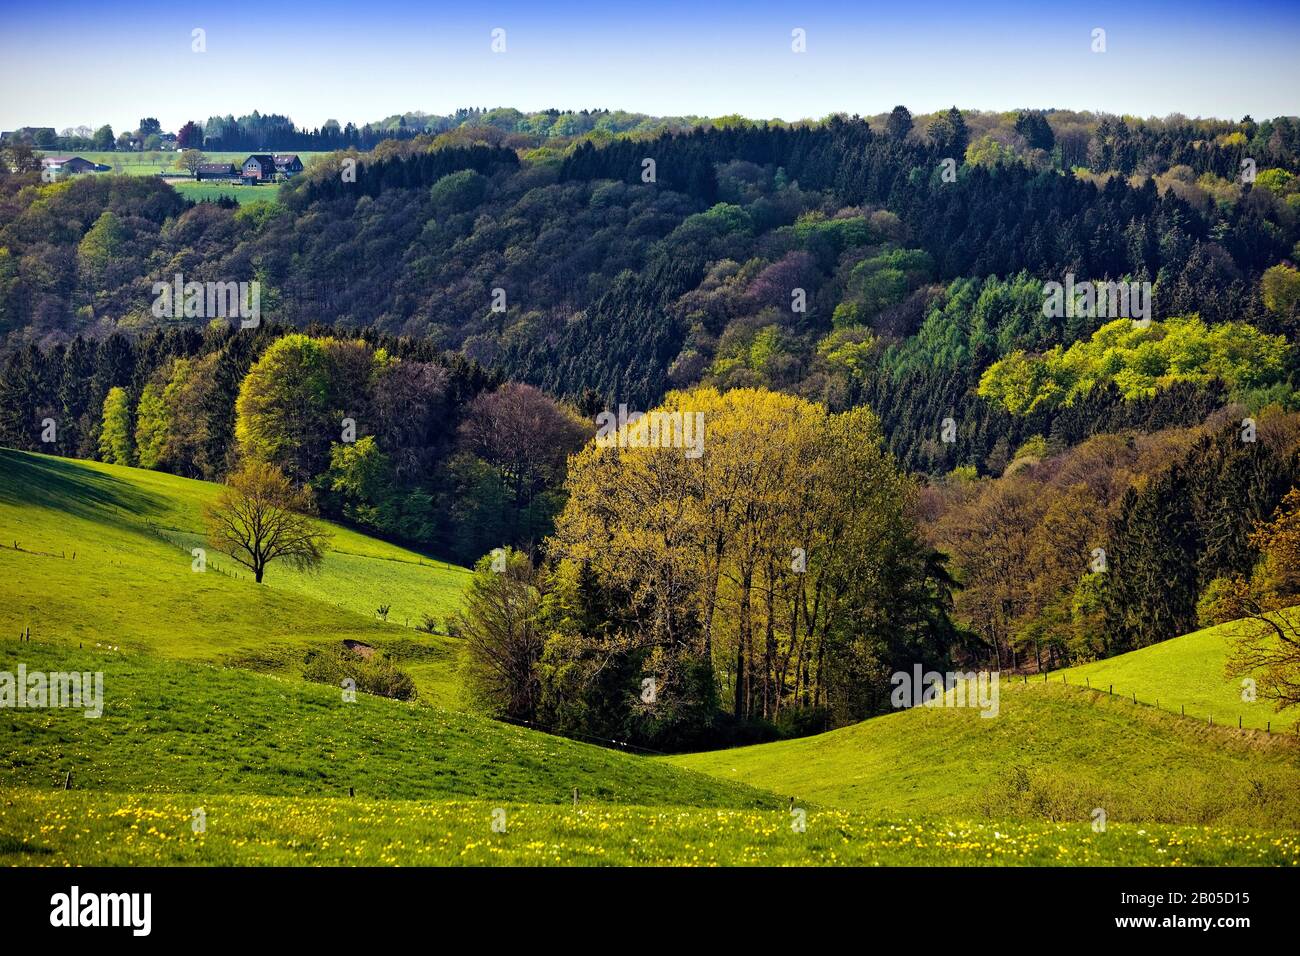 meadows and forests in hilly landscape in spring, Germany, North Rhine-Westphalia, Bergisches Land, Radevormwald Stock Photo